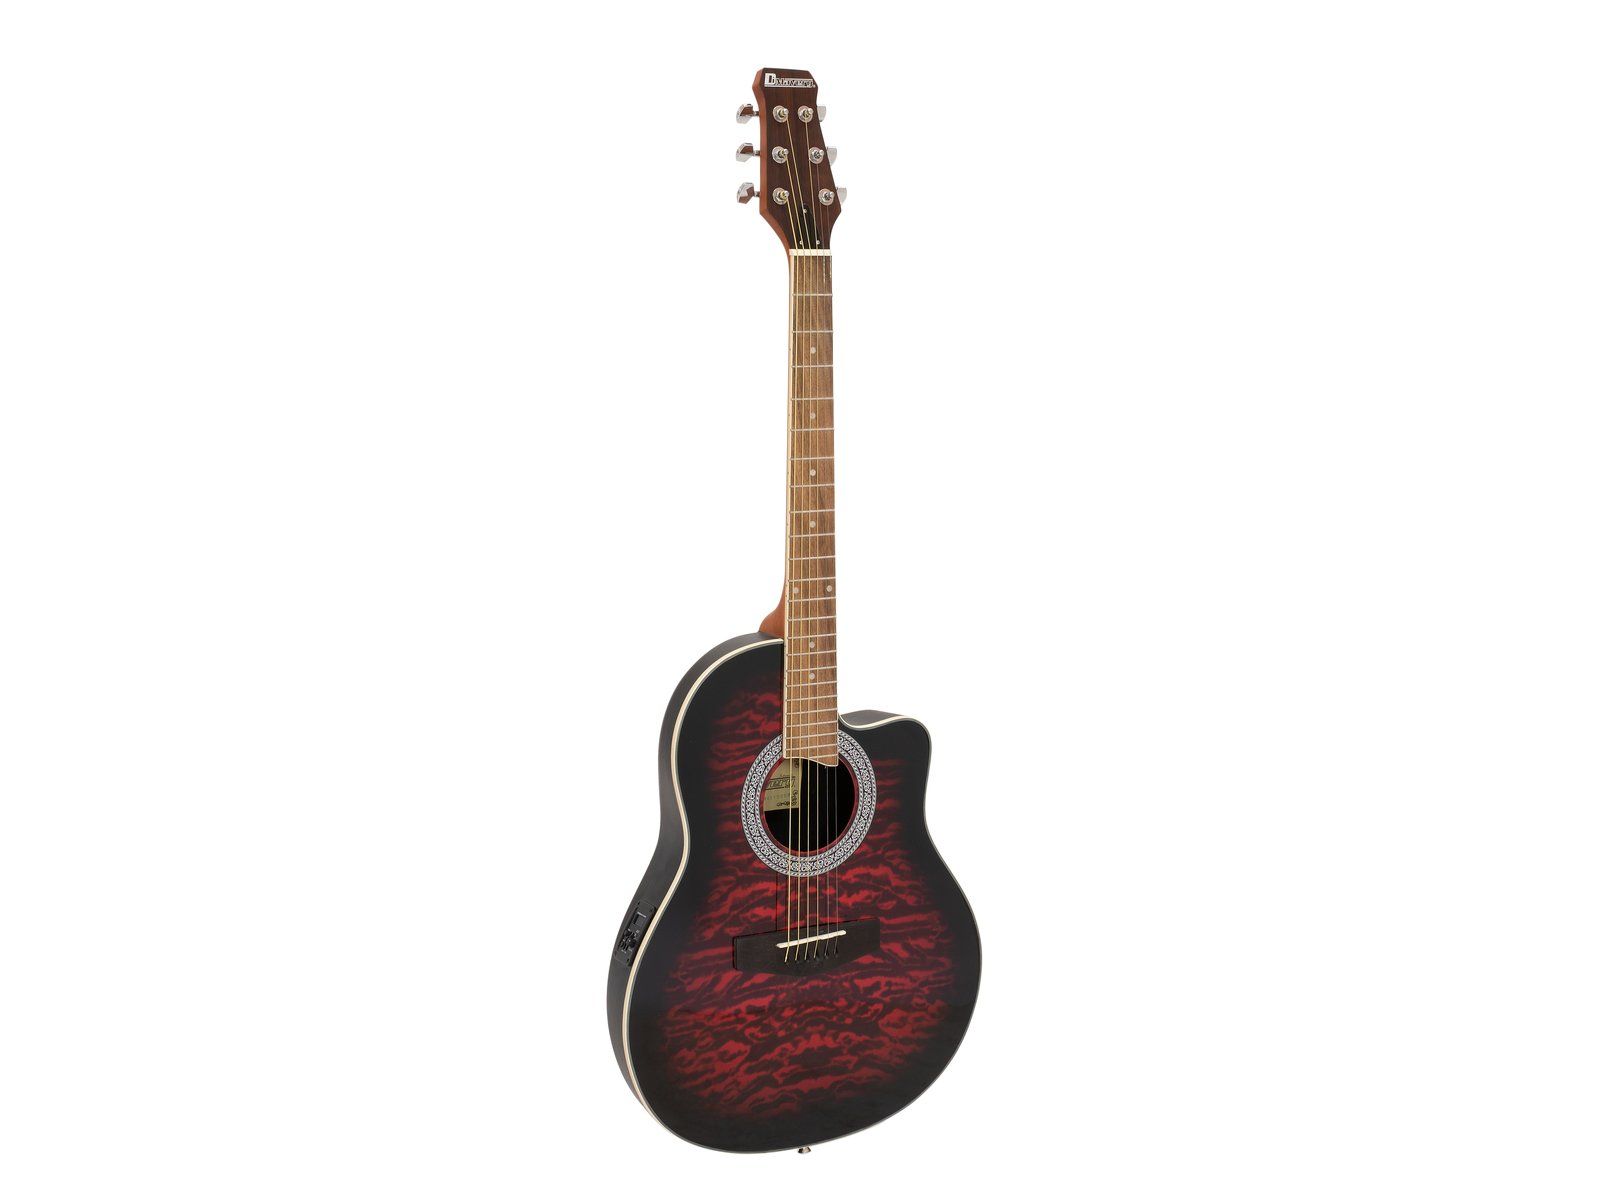 Dimavery RB-300 Rounded back Red